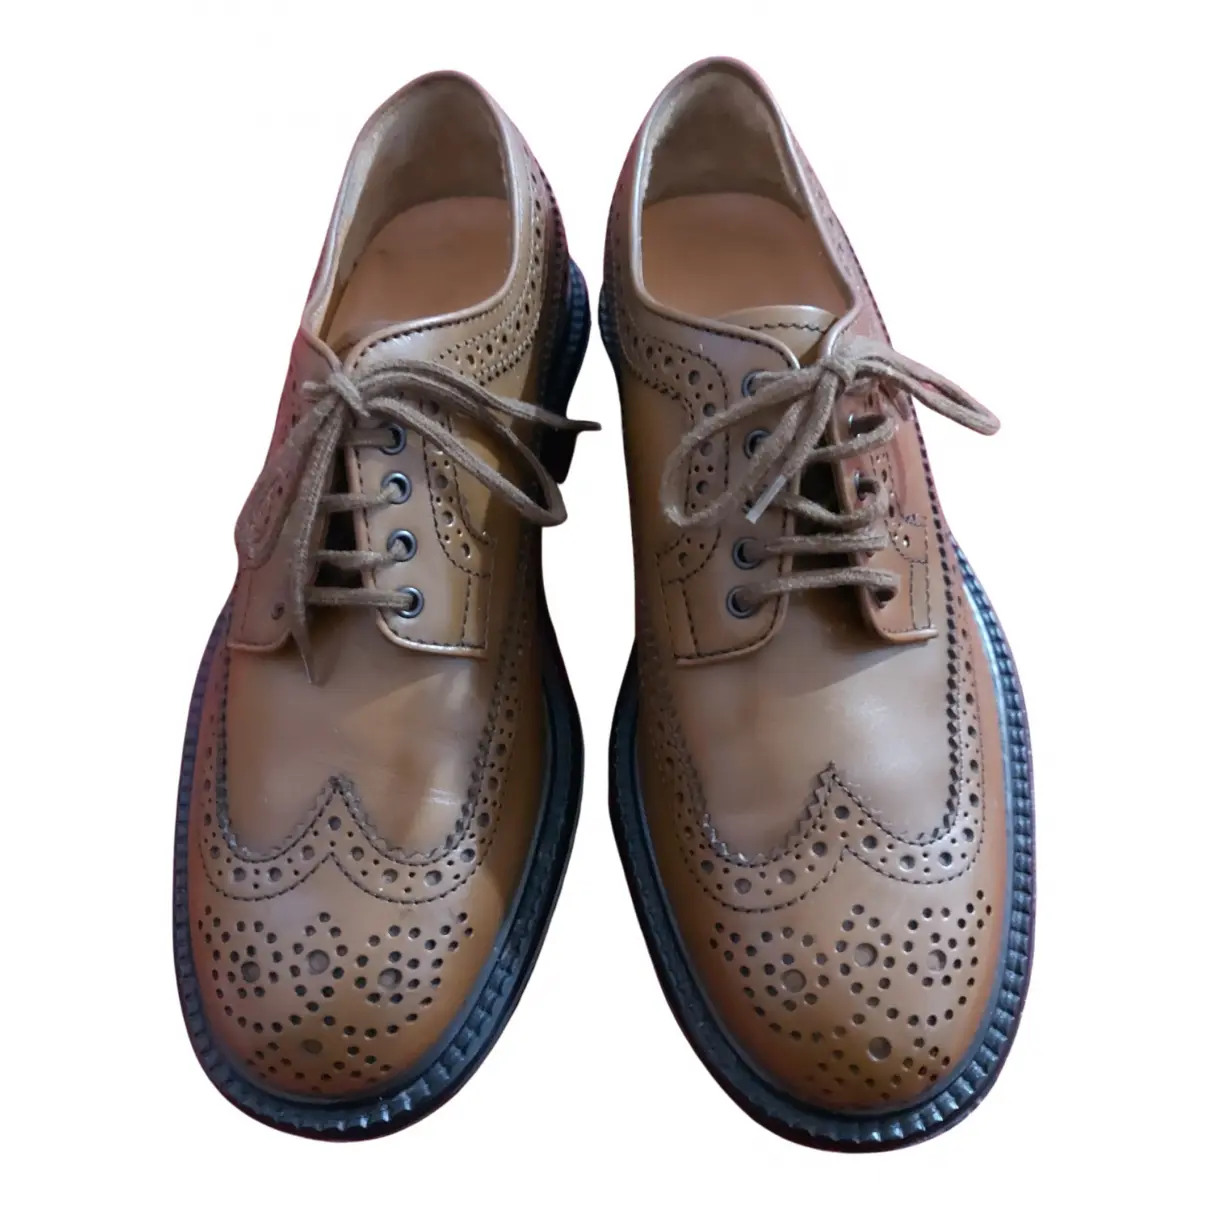 Leather lace ups Tod's